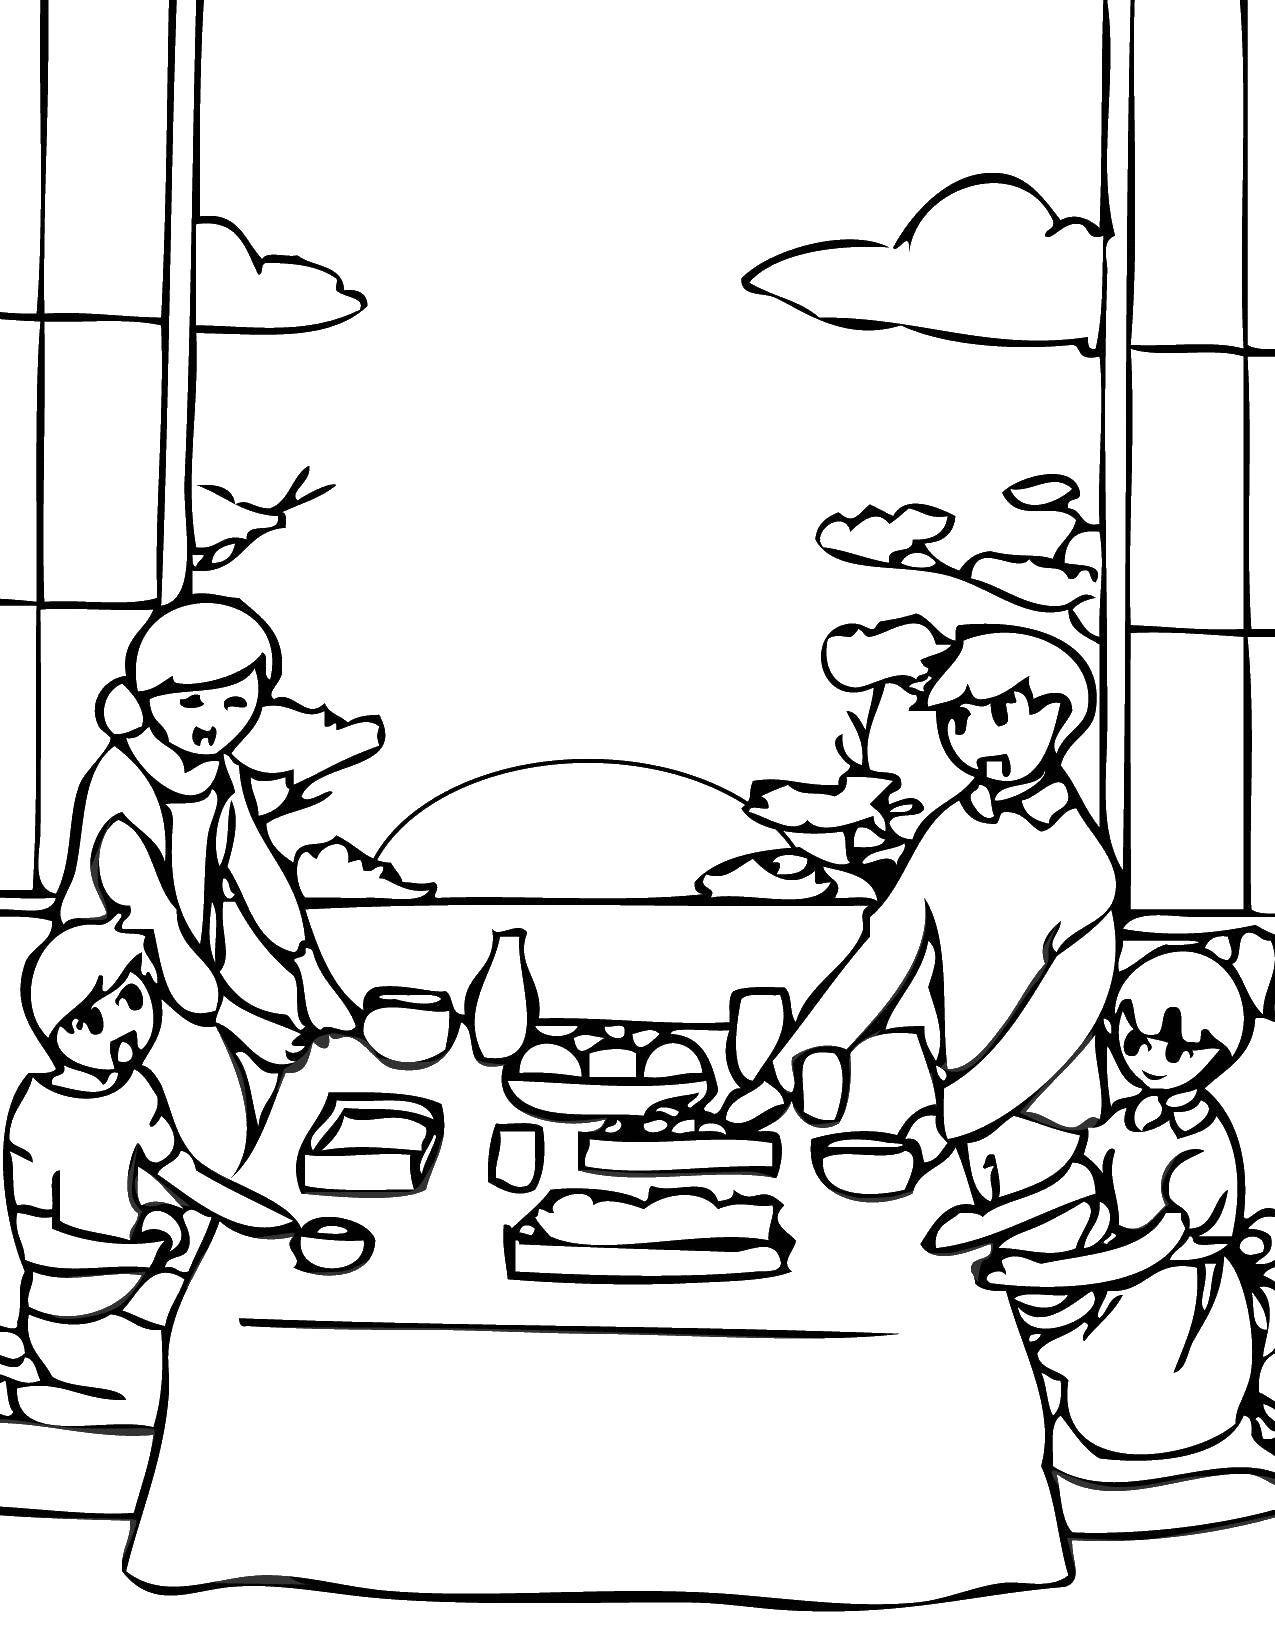 Coloring Dinner with the whole family. Category Family. Tags:  Family, parents, children.